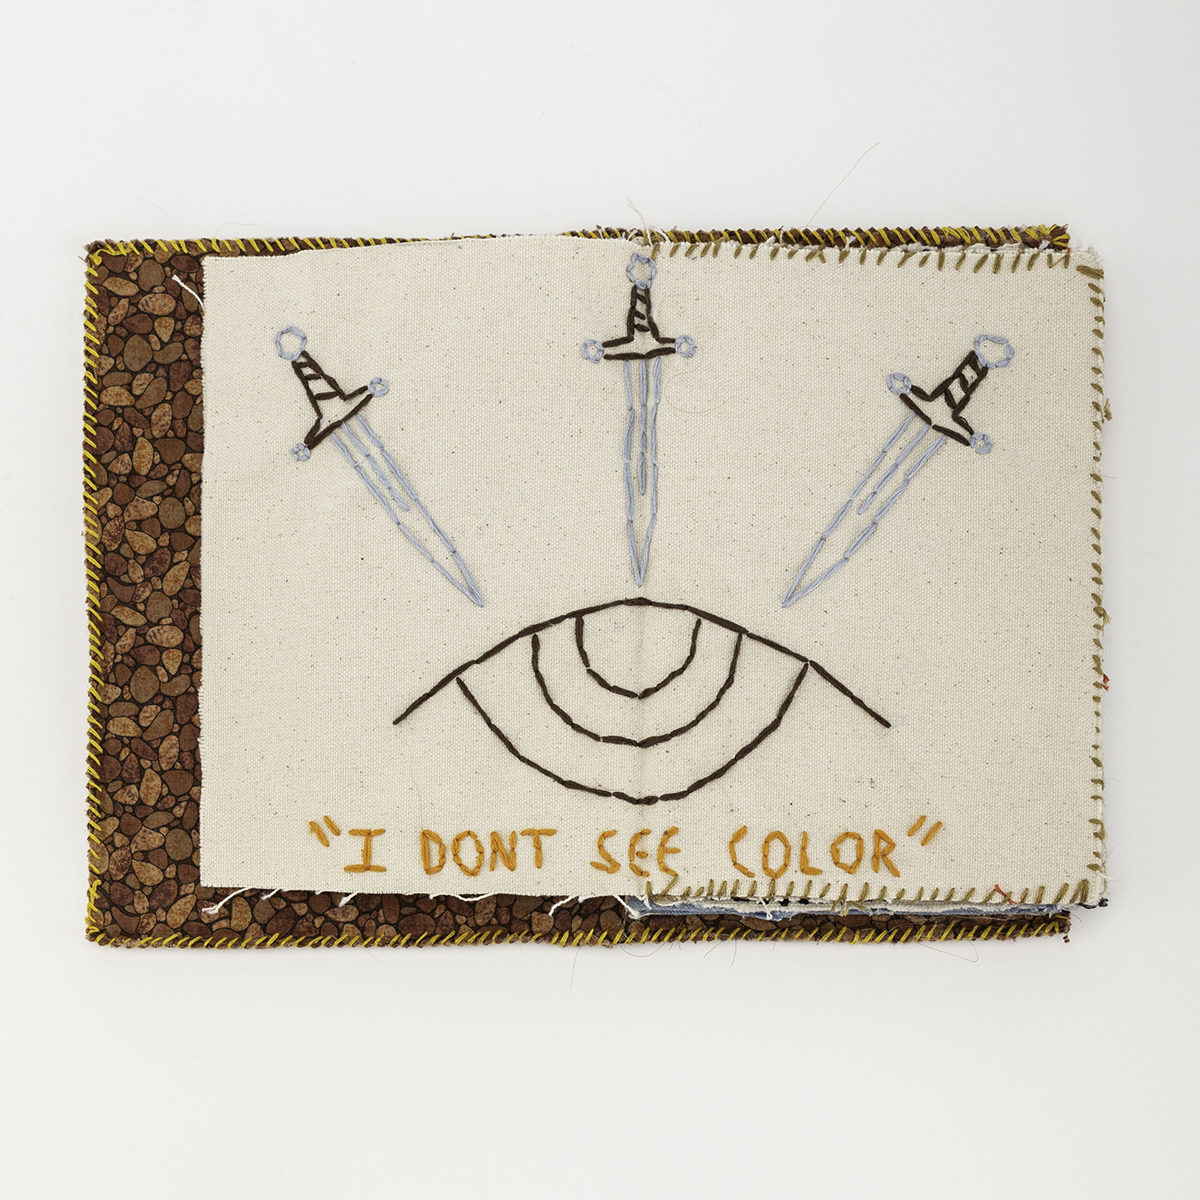 Handmade book layed open two page spread with fabric pages, image of eye and three swords sewn in with sewn text below eye reading 'I don't see color'